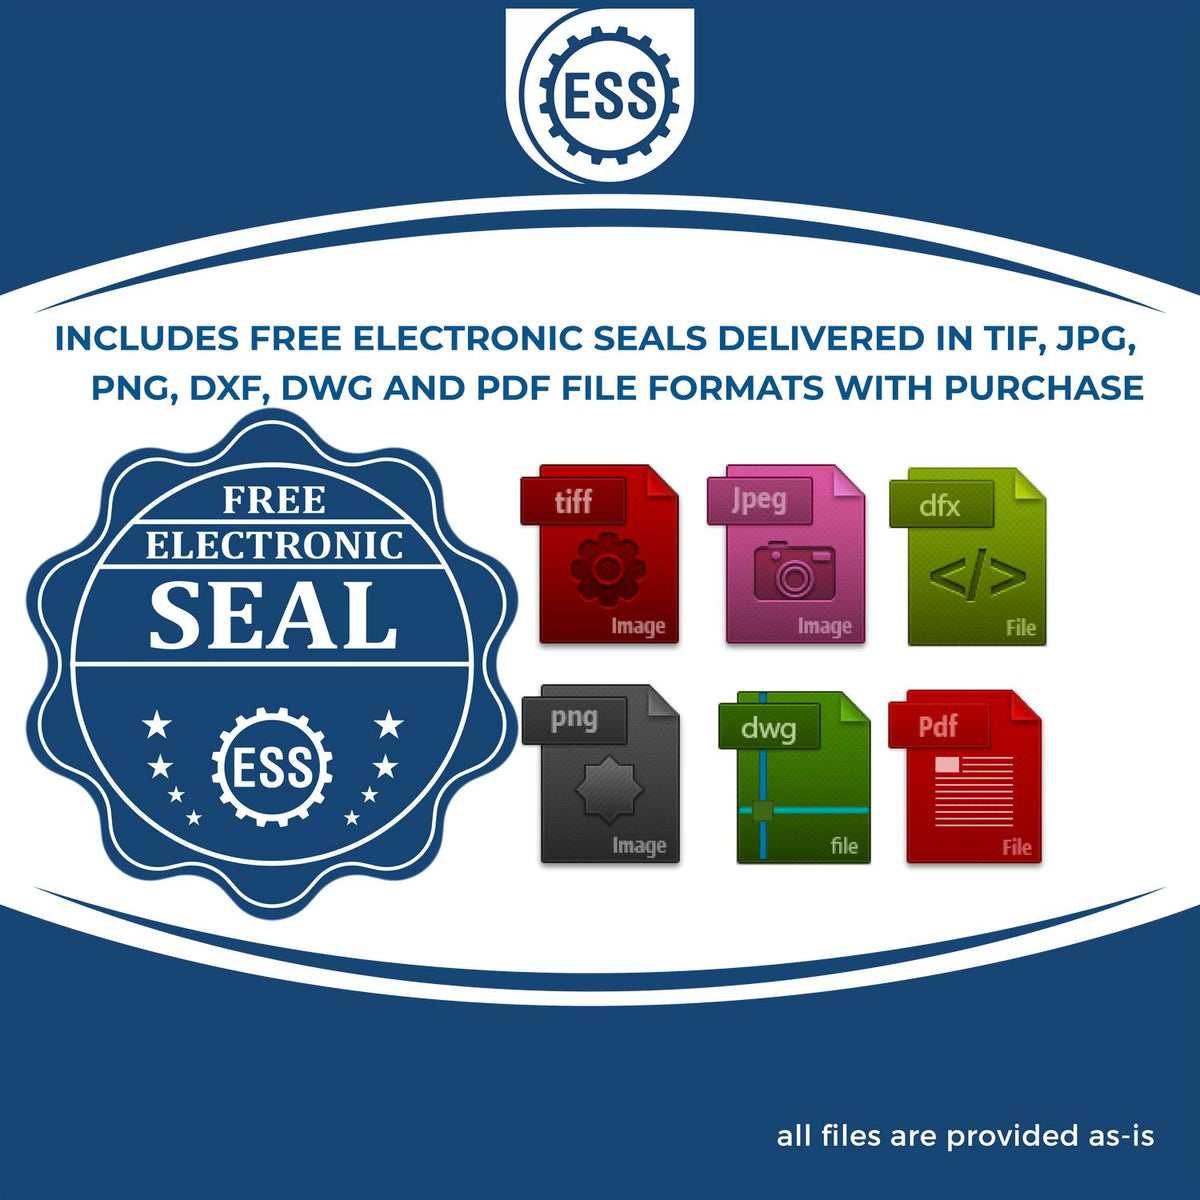 An infographic for the free electronic seal for the South Dakota Professional Geologist Seal Stamp illustrating the different file type icons such as DXF, DWG, TIF, JPG and PNG.